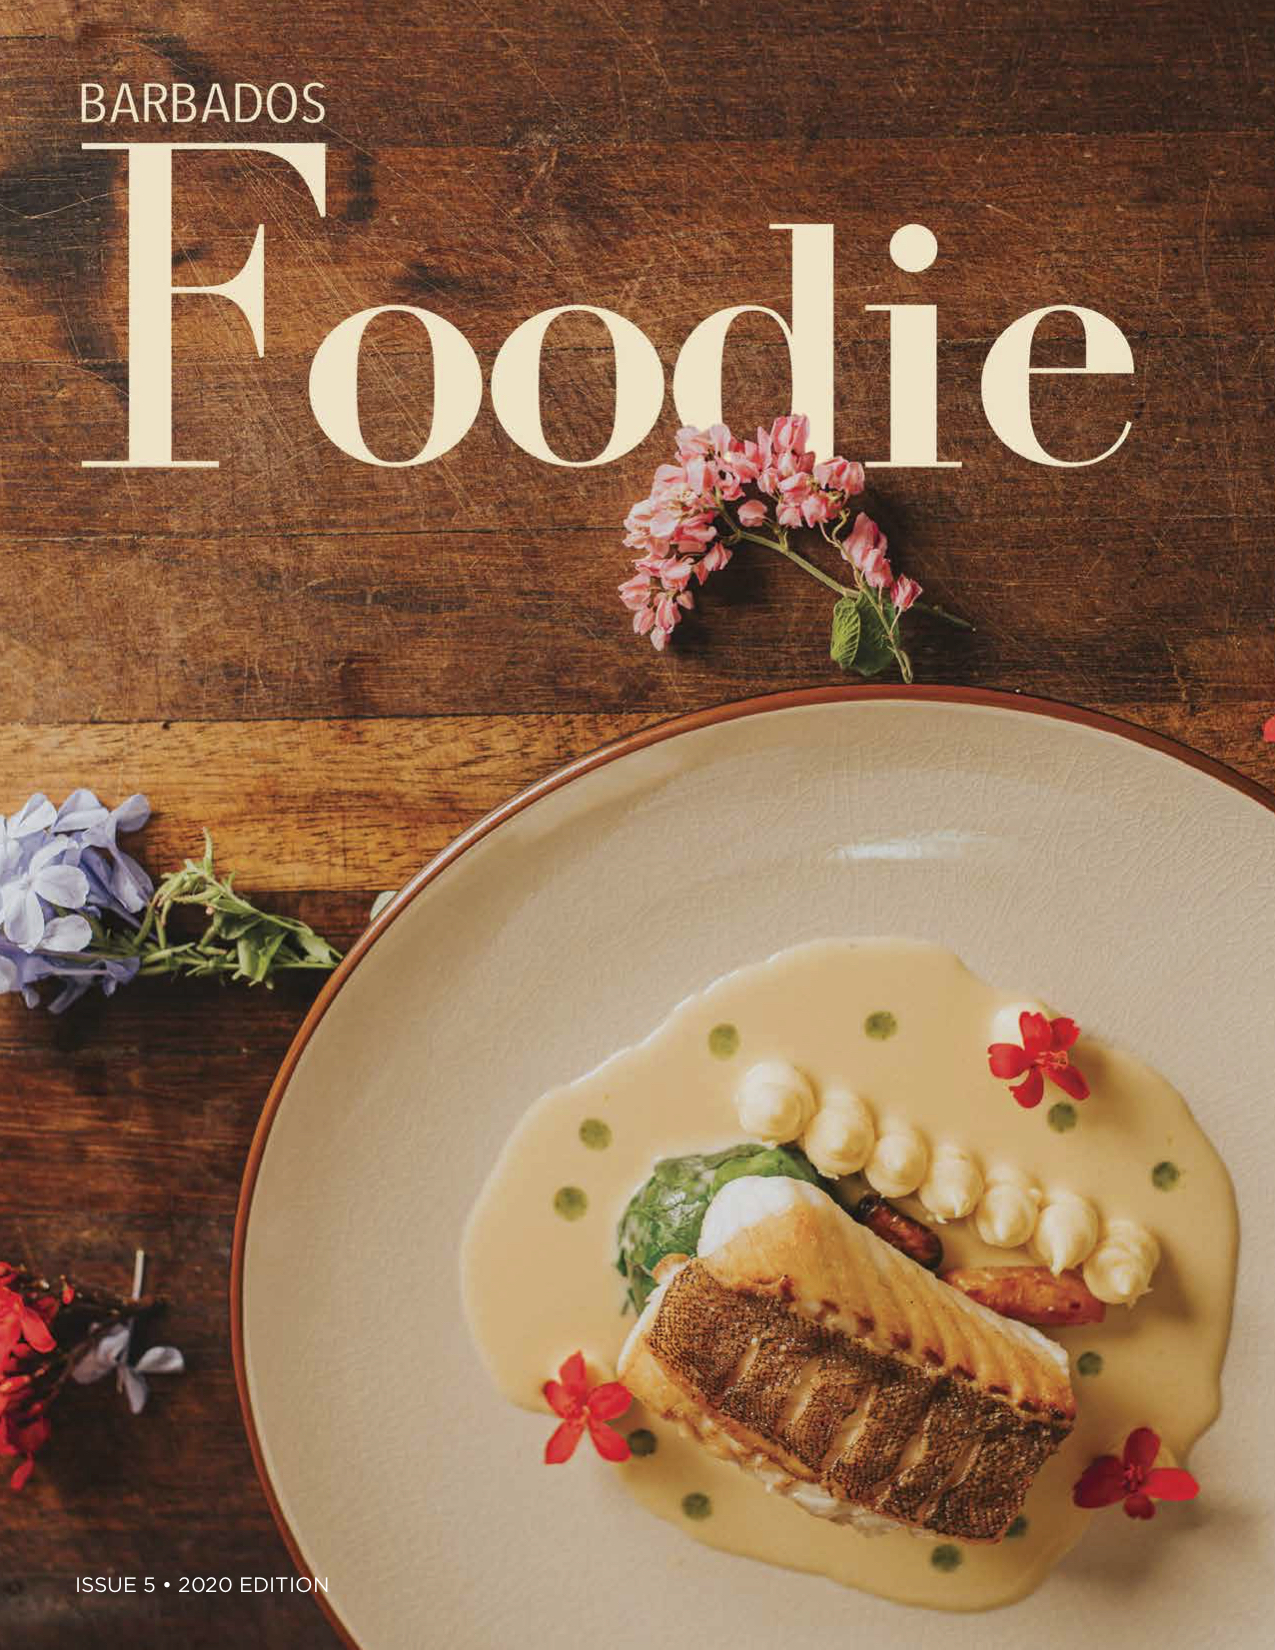 Barbados Foodie Issue 5 Cover Image